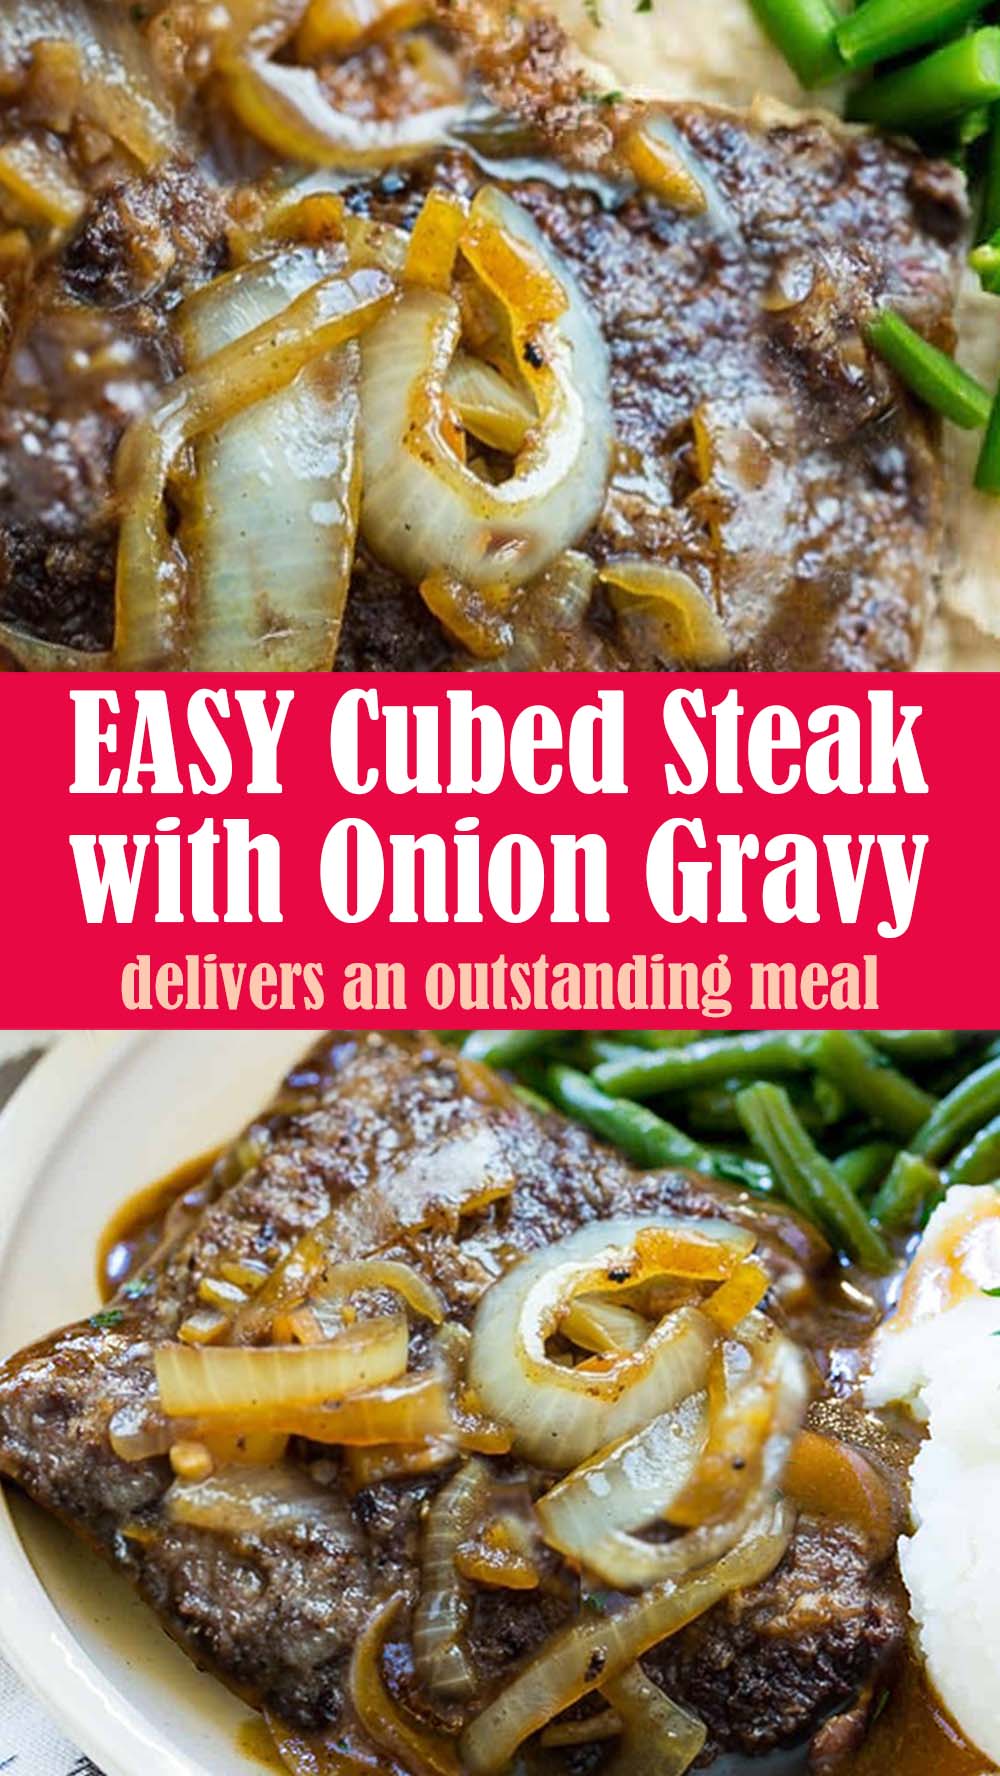 EASY Cubed Steak with Onion Gravy